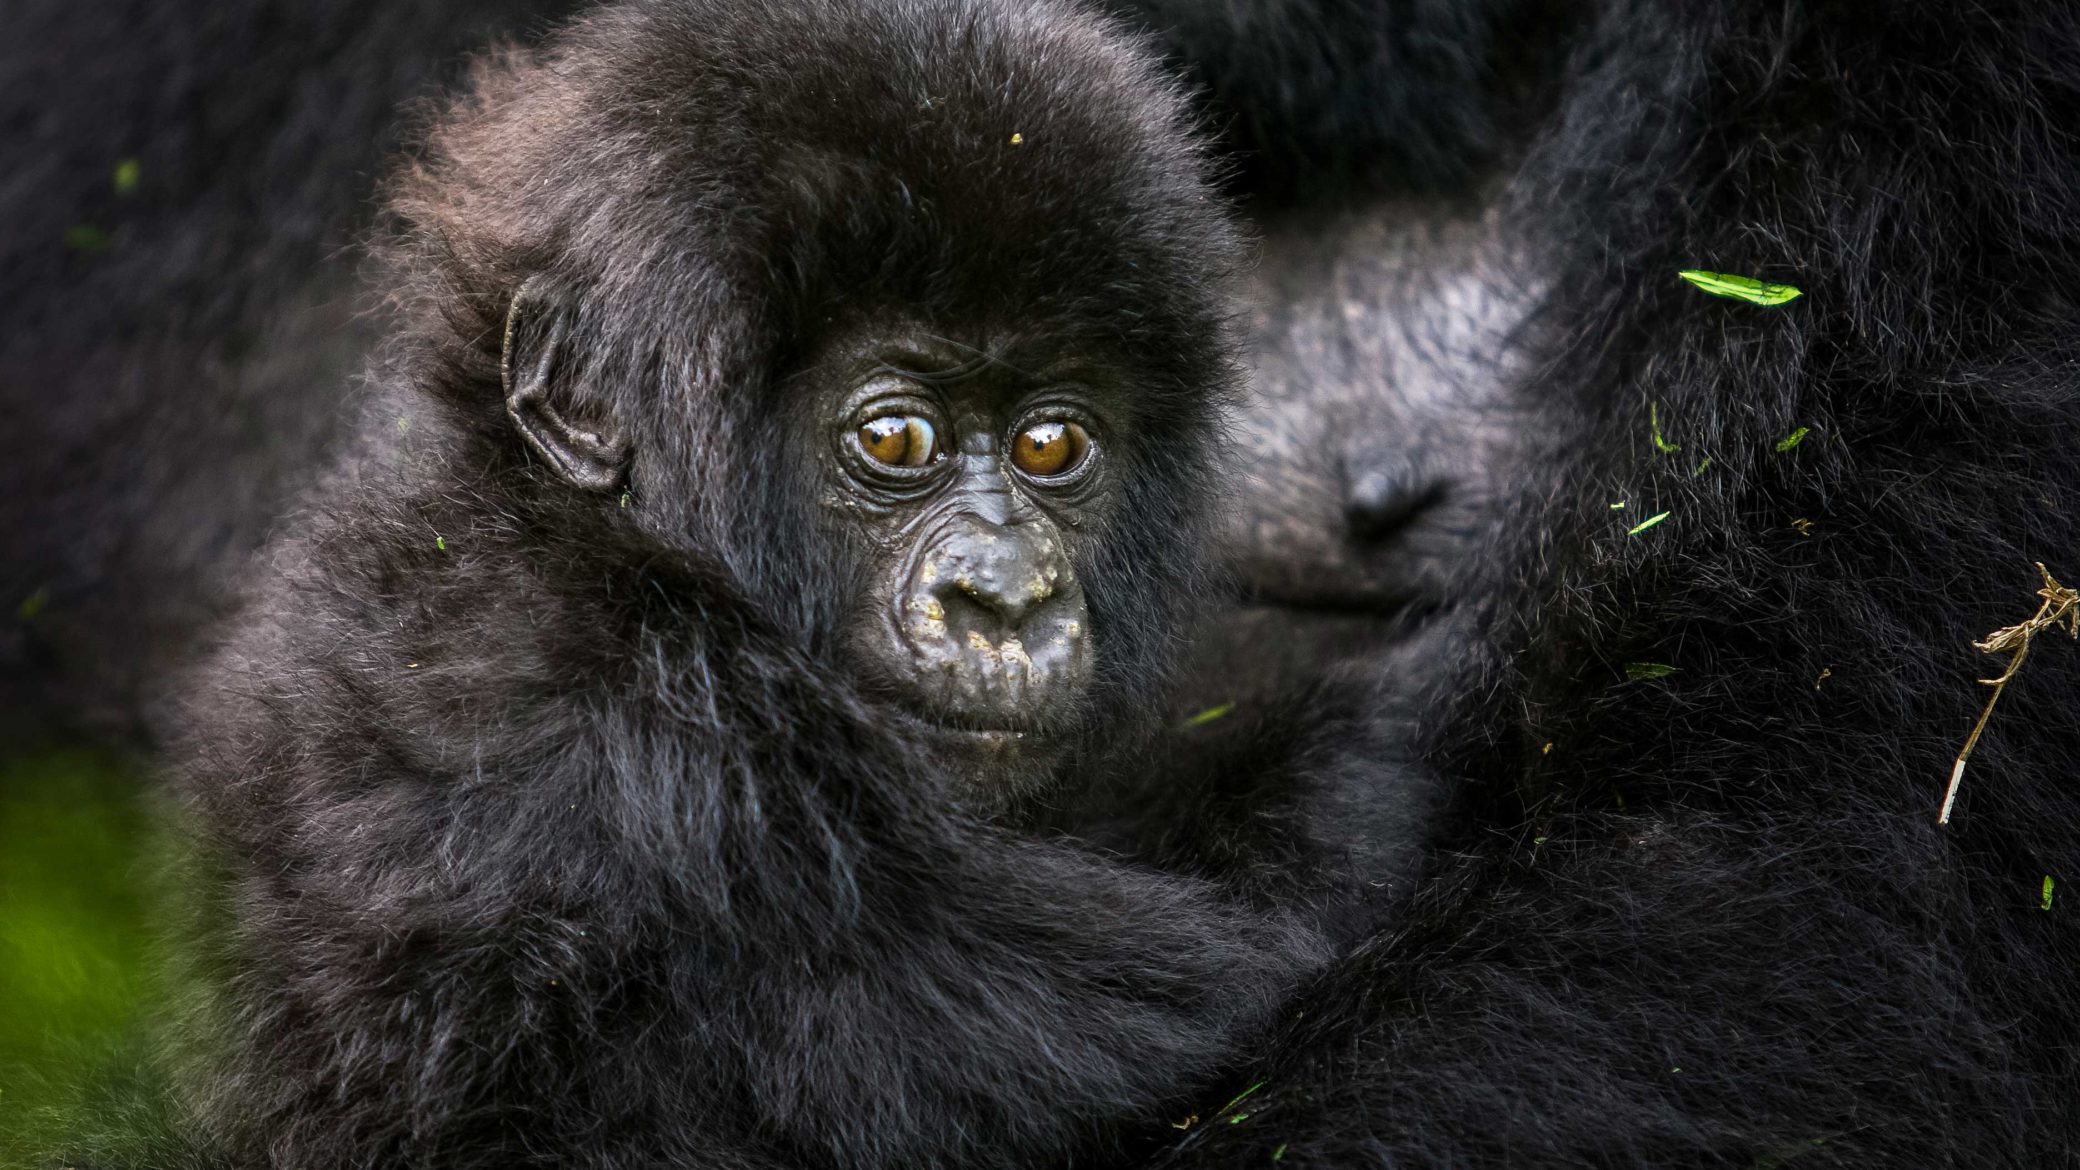 Close up of a baby mountain gorilla in the rainforest